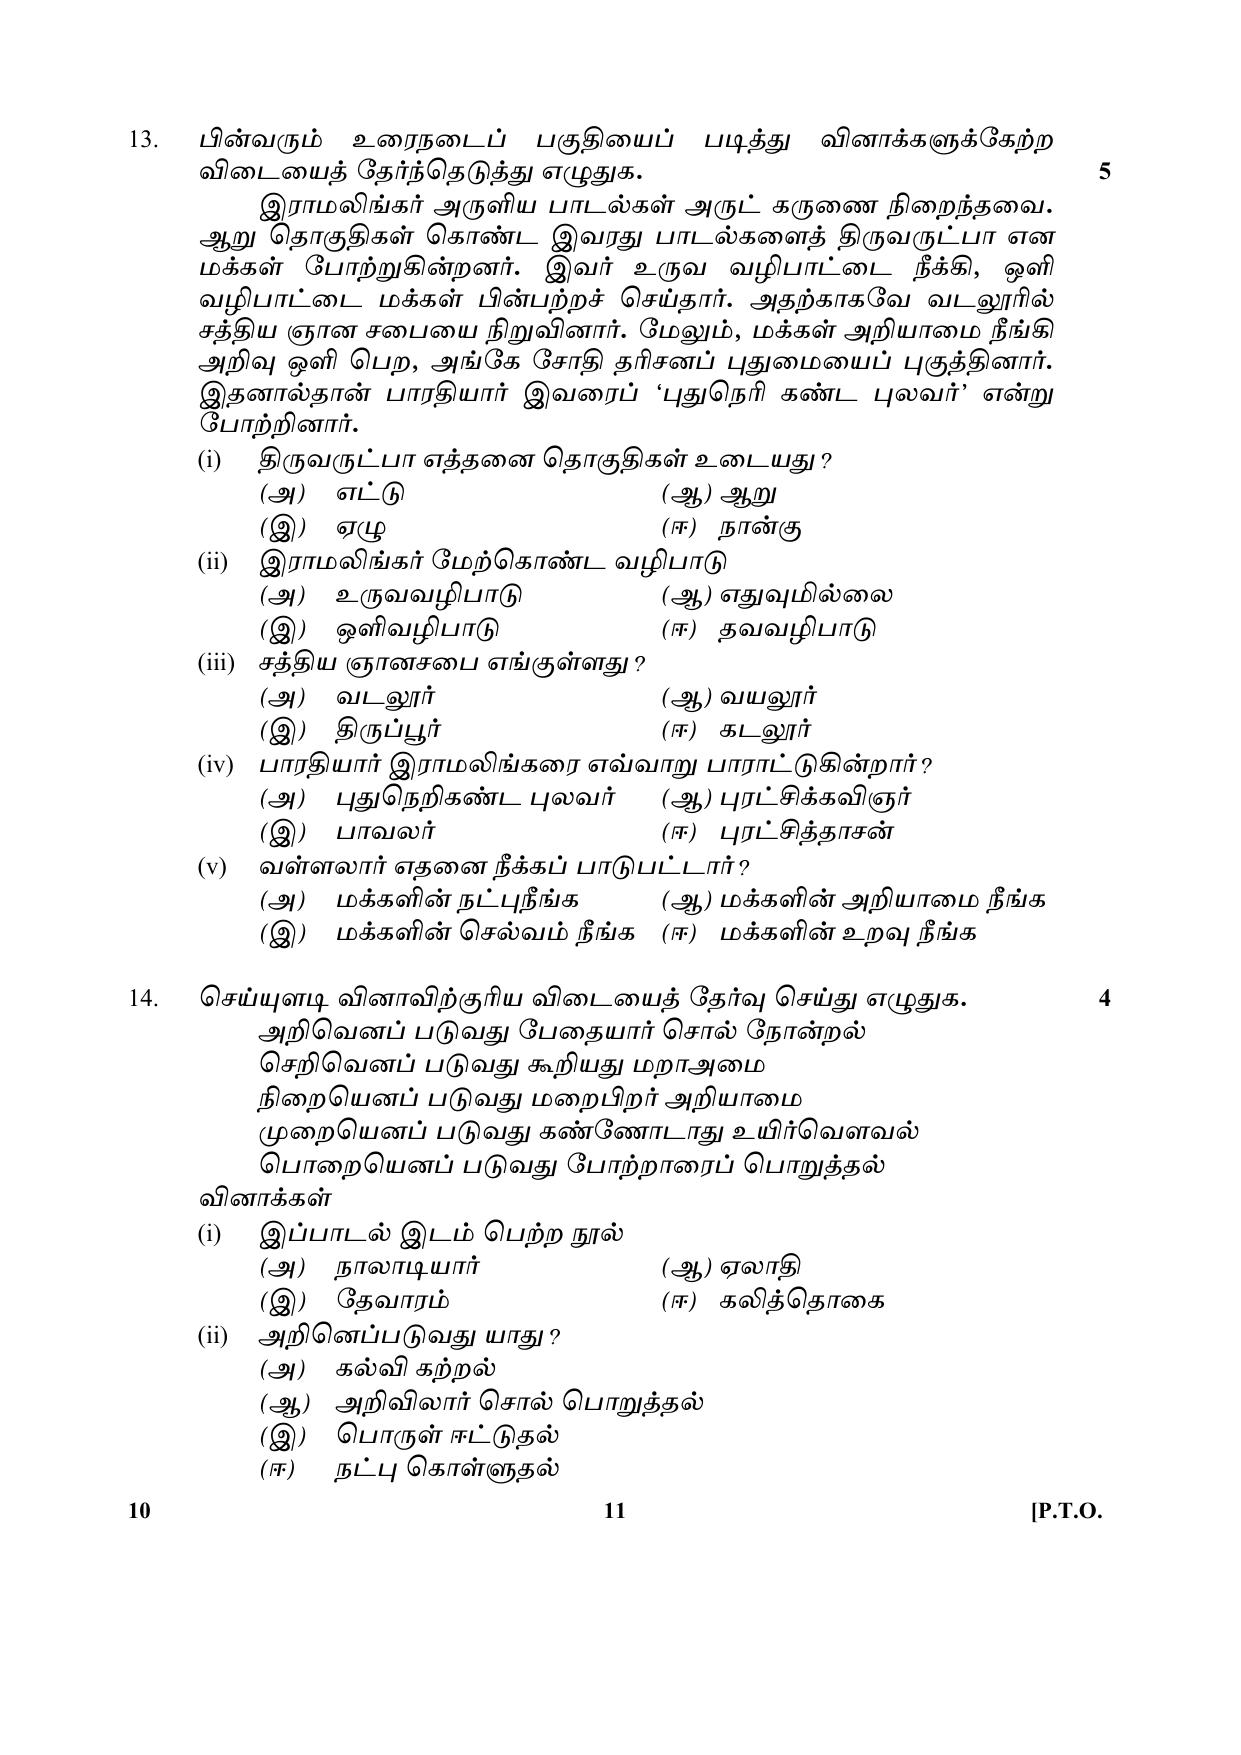 CBSE Class 10 10-Tamil 2017-comptt Question Paper - Page 11